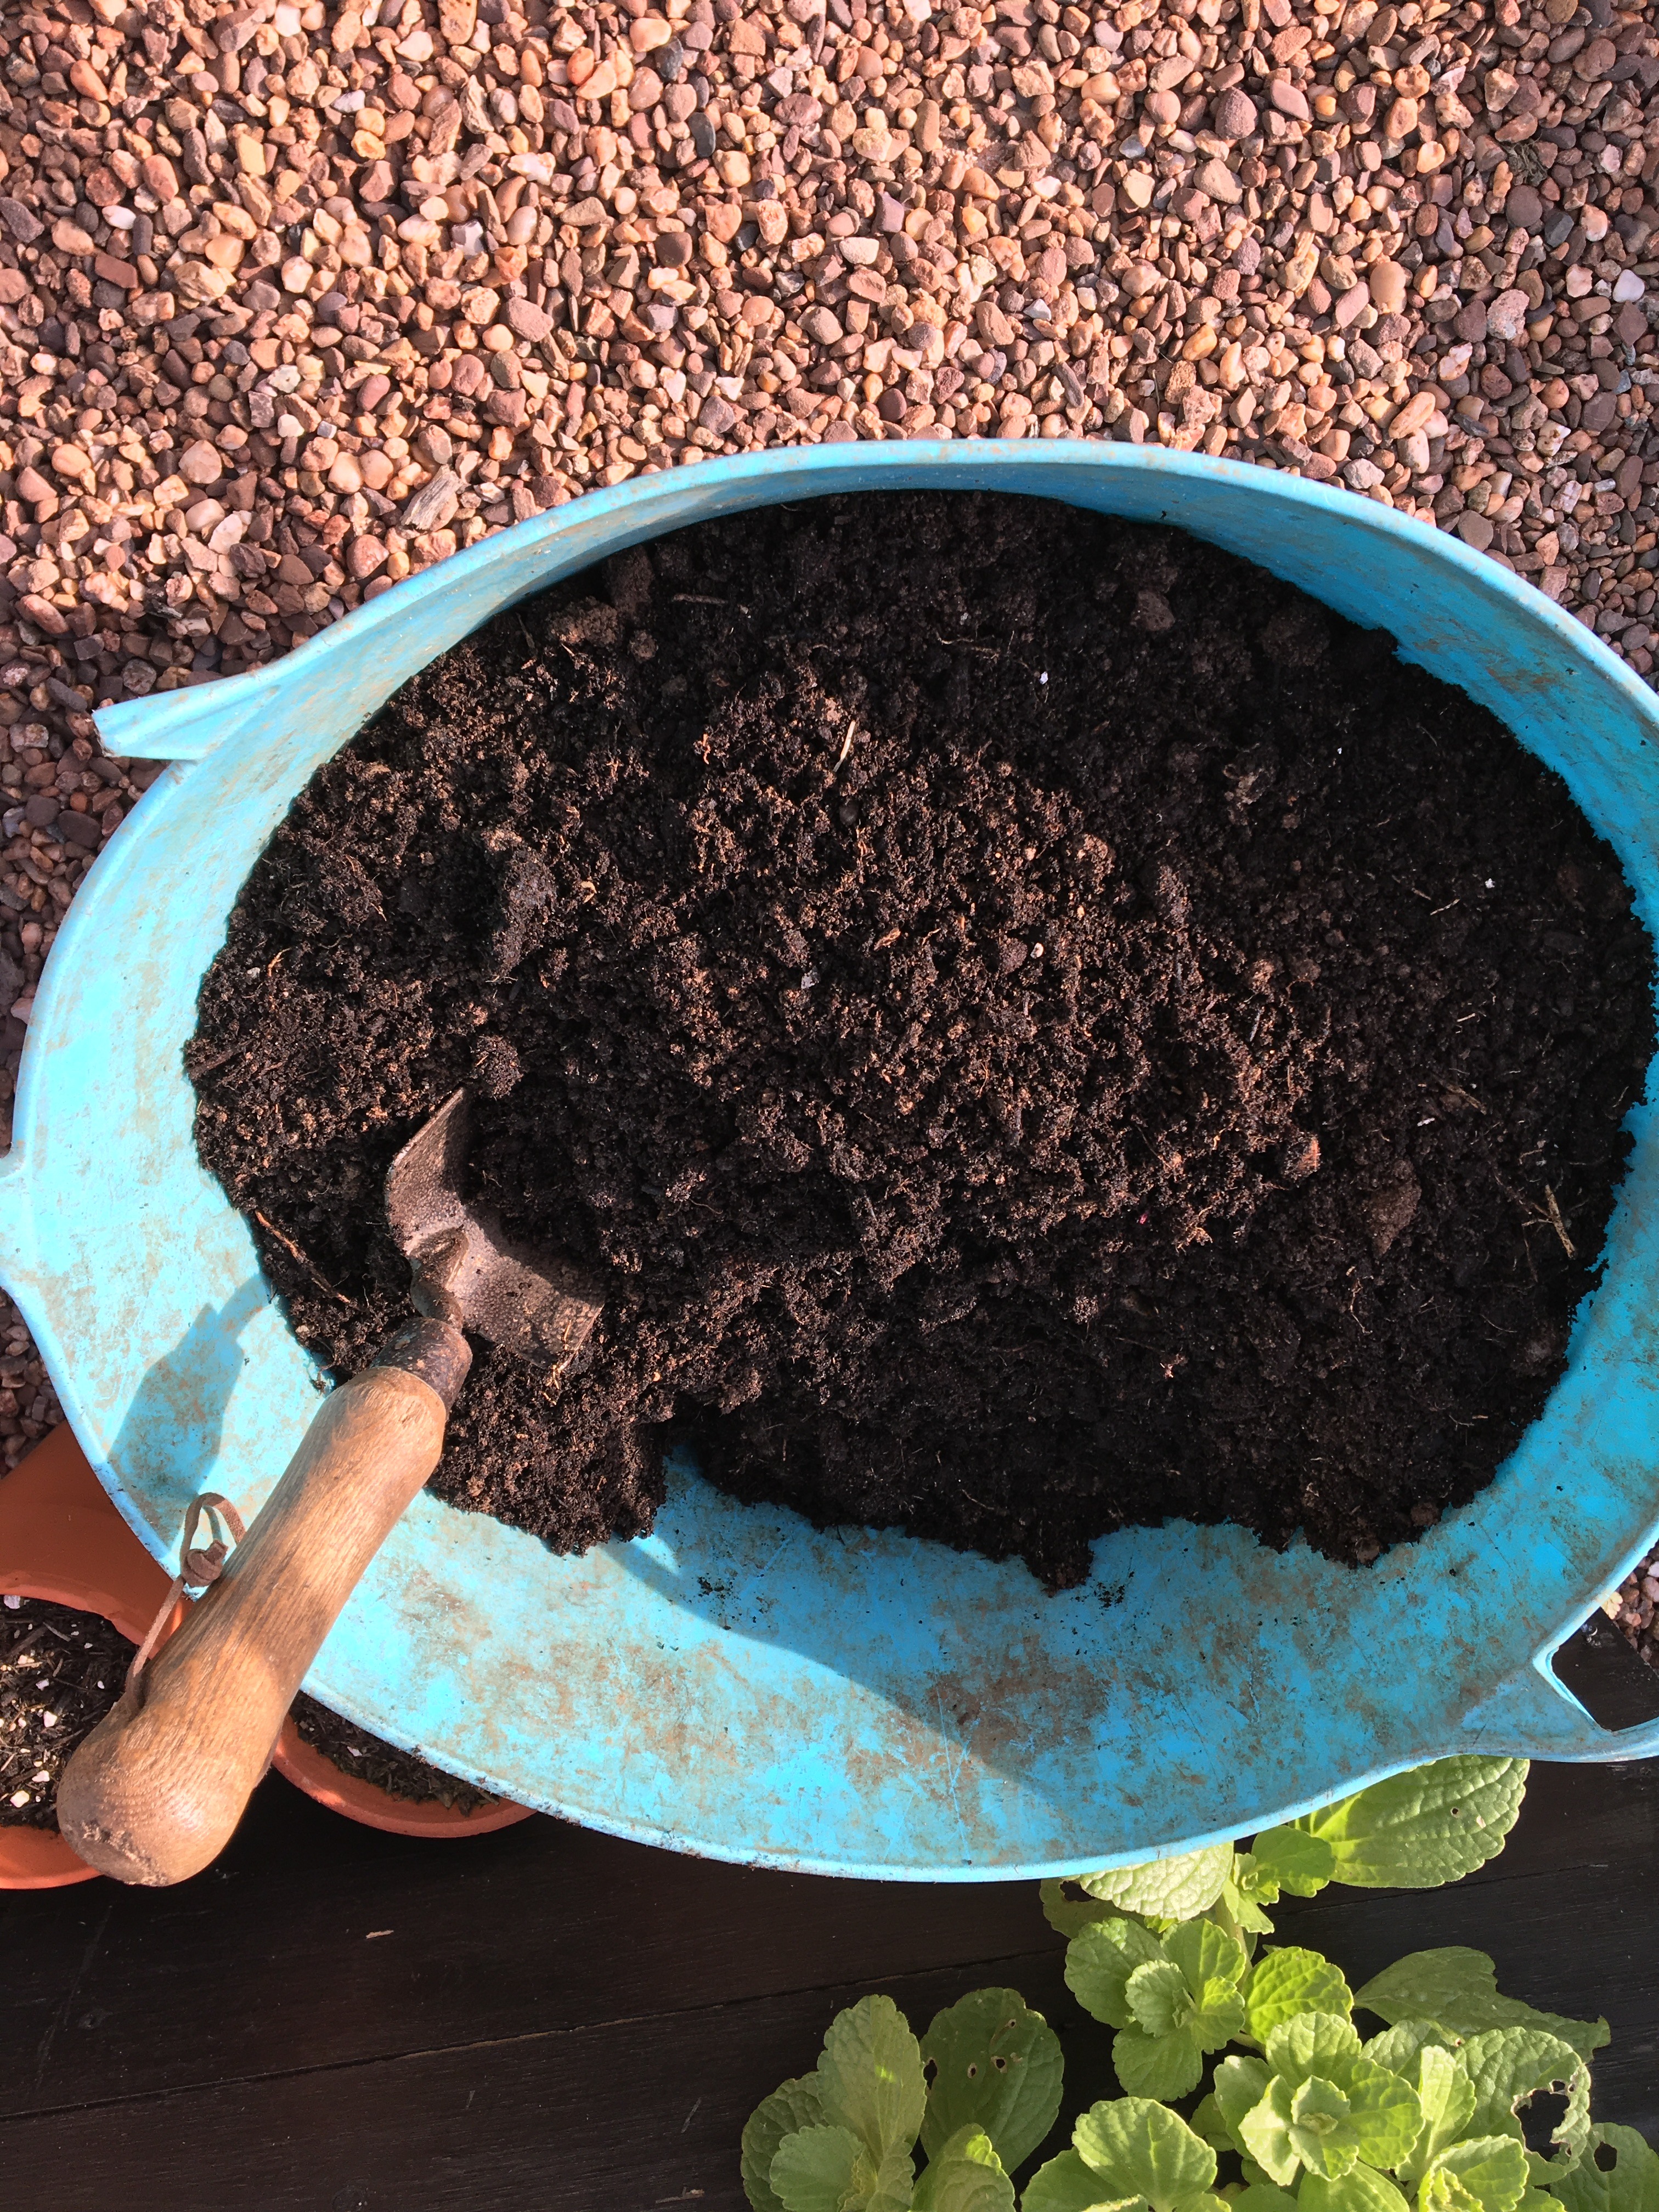 How To Make Compost For Use In The Garden